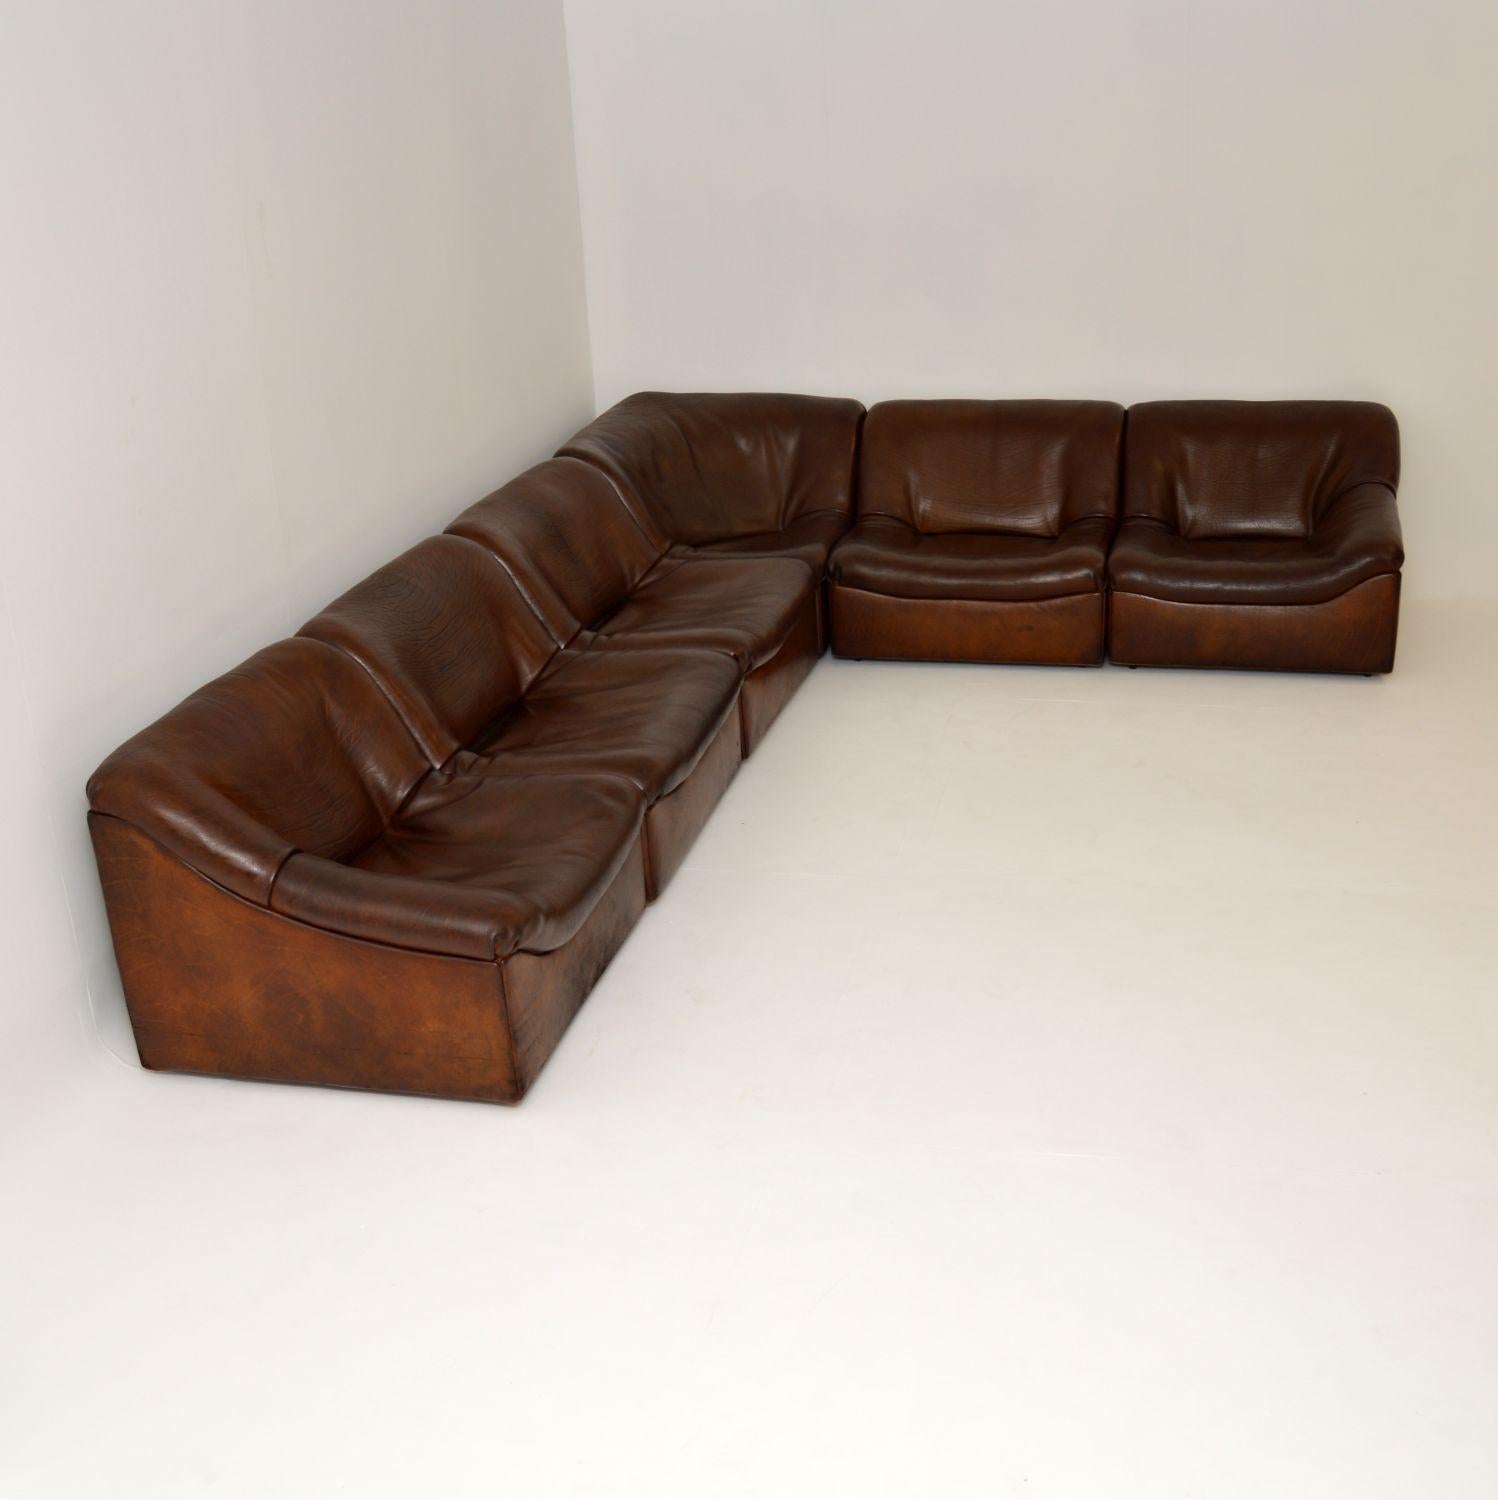 A stunning and very comfortable vintage leather corner sofa of the most amazing quality, this is the DS46 made by De Sede in Switzerland. It dates from the 1960s-1970s, and is in amazing condition for its age. We have had the thick high quality